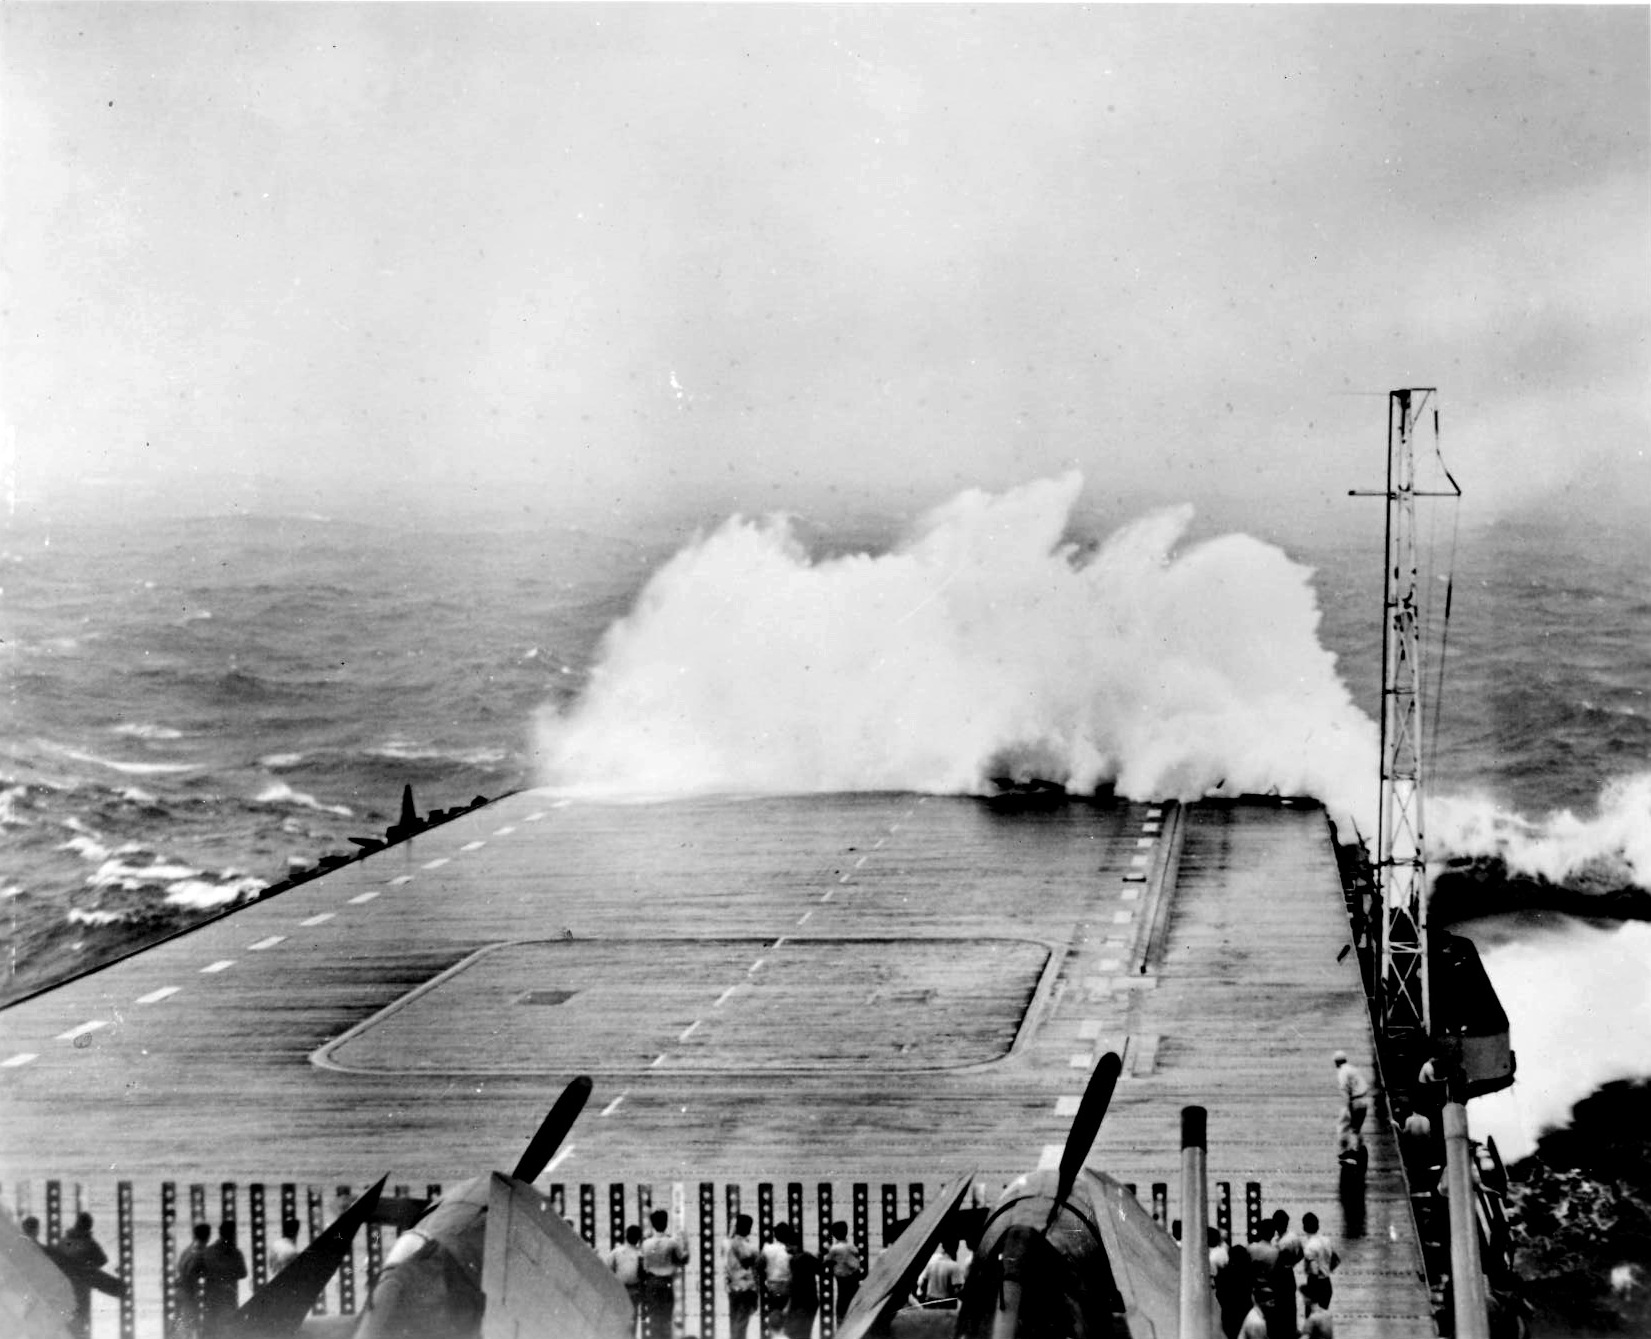 USS Hornet (Essex-class) taking white water over the bow in heavy seas during Typhoon Connie off Okinawa, 5 Jun 1945. Hornet would soon take green water over the bow that collapsed the forward 24 feet of her flight deck.